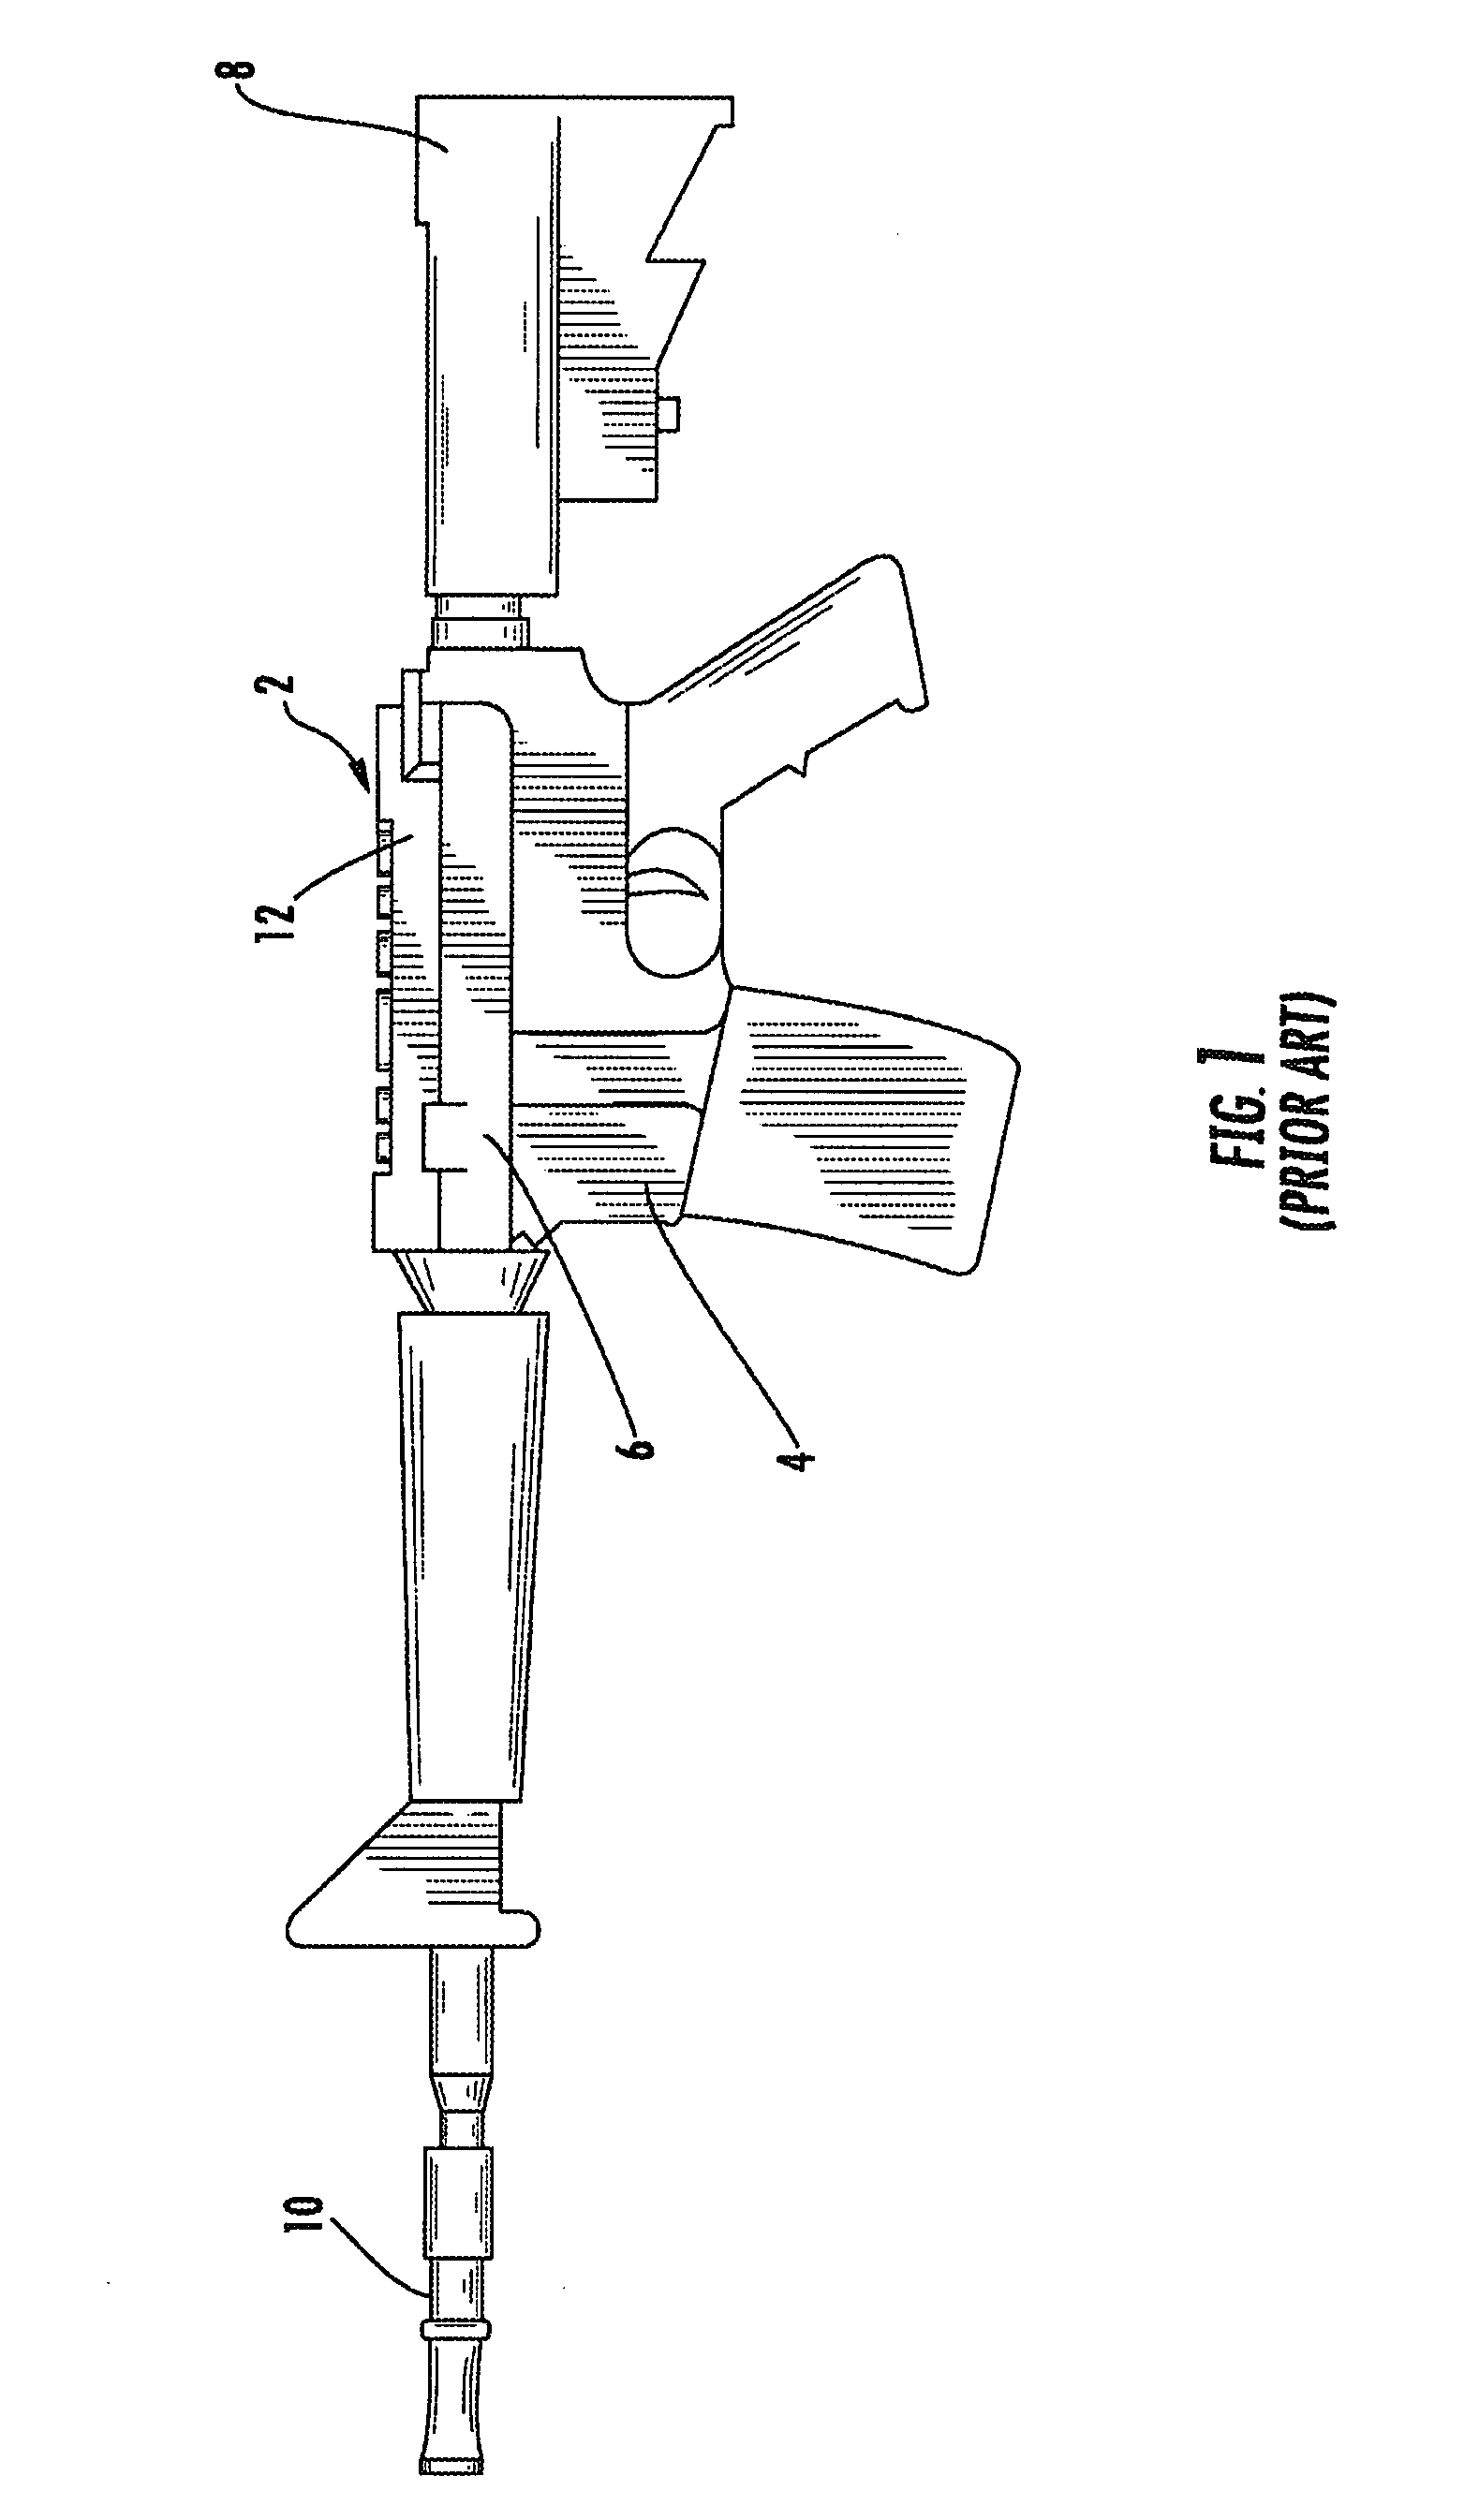 Mounting assembly with positive stop for actuator arm